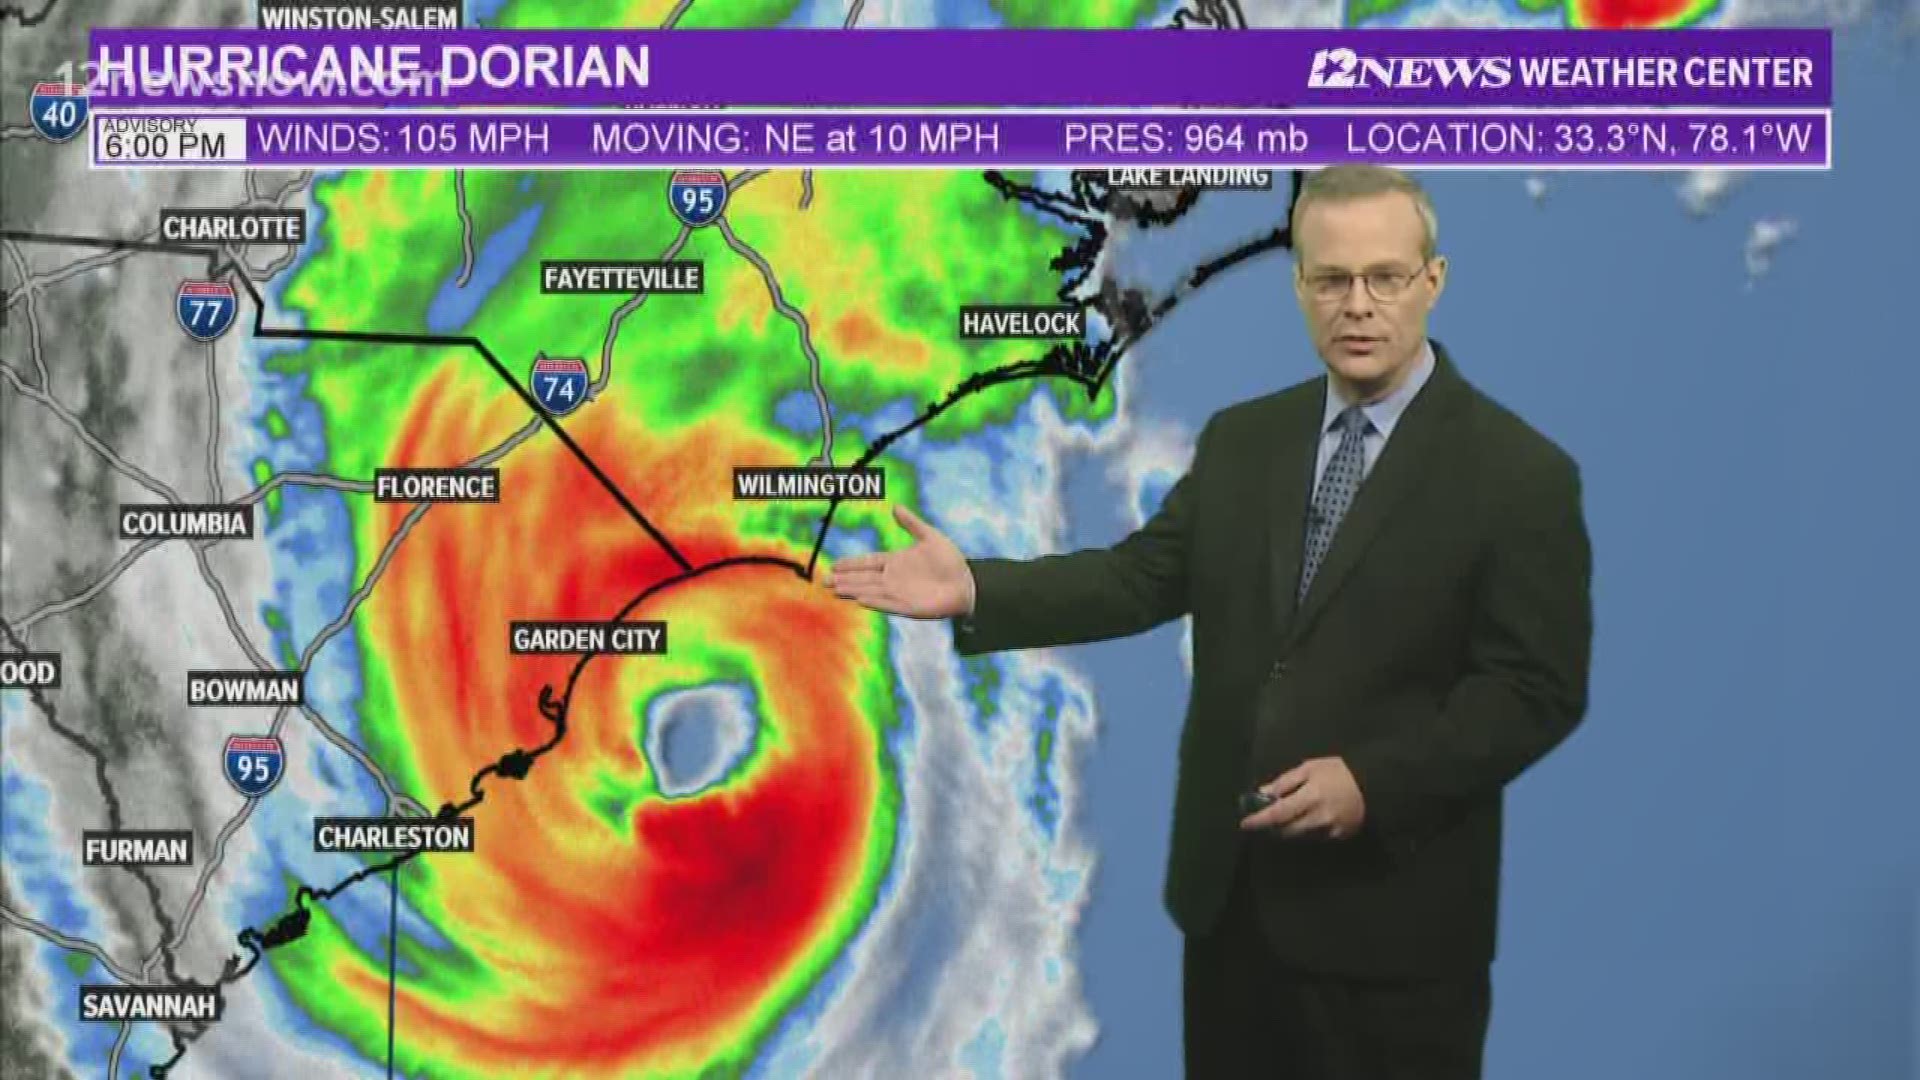 The storm is continuing to create hazardous conditions for North and South Carolina.